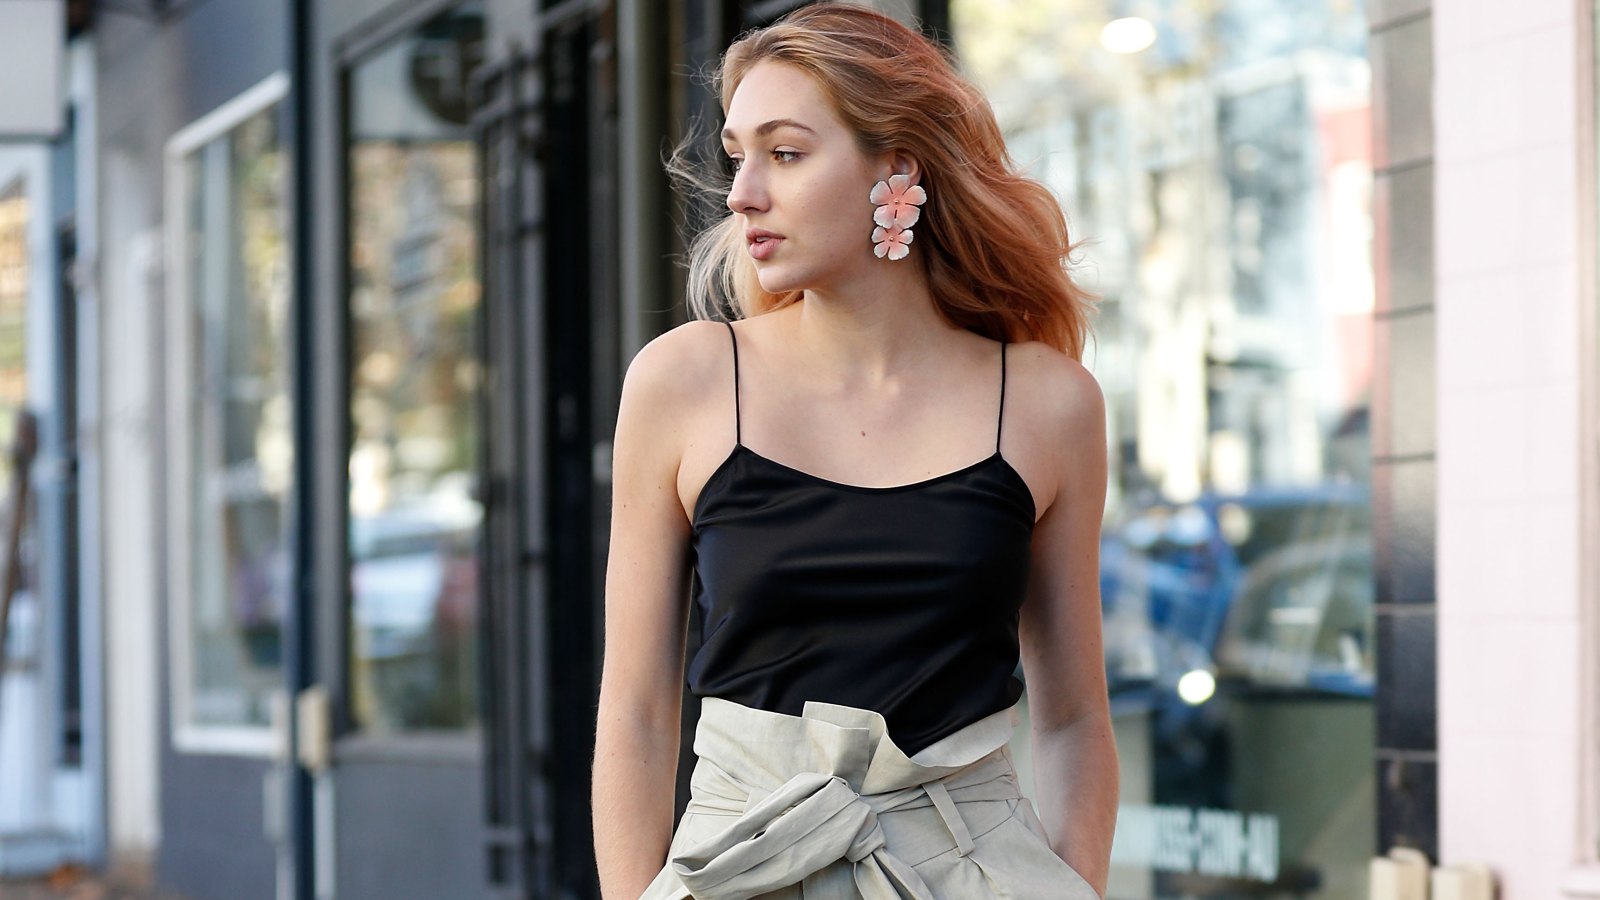 Sheer, Strappy Camisoles -- Are They a Don't?